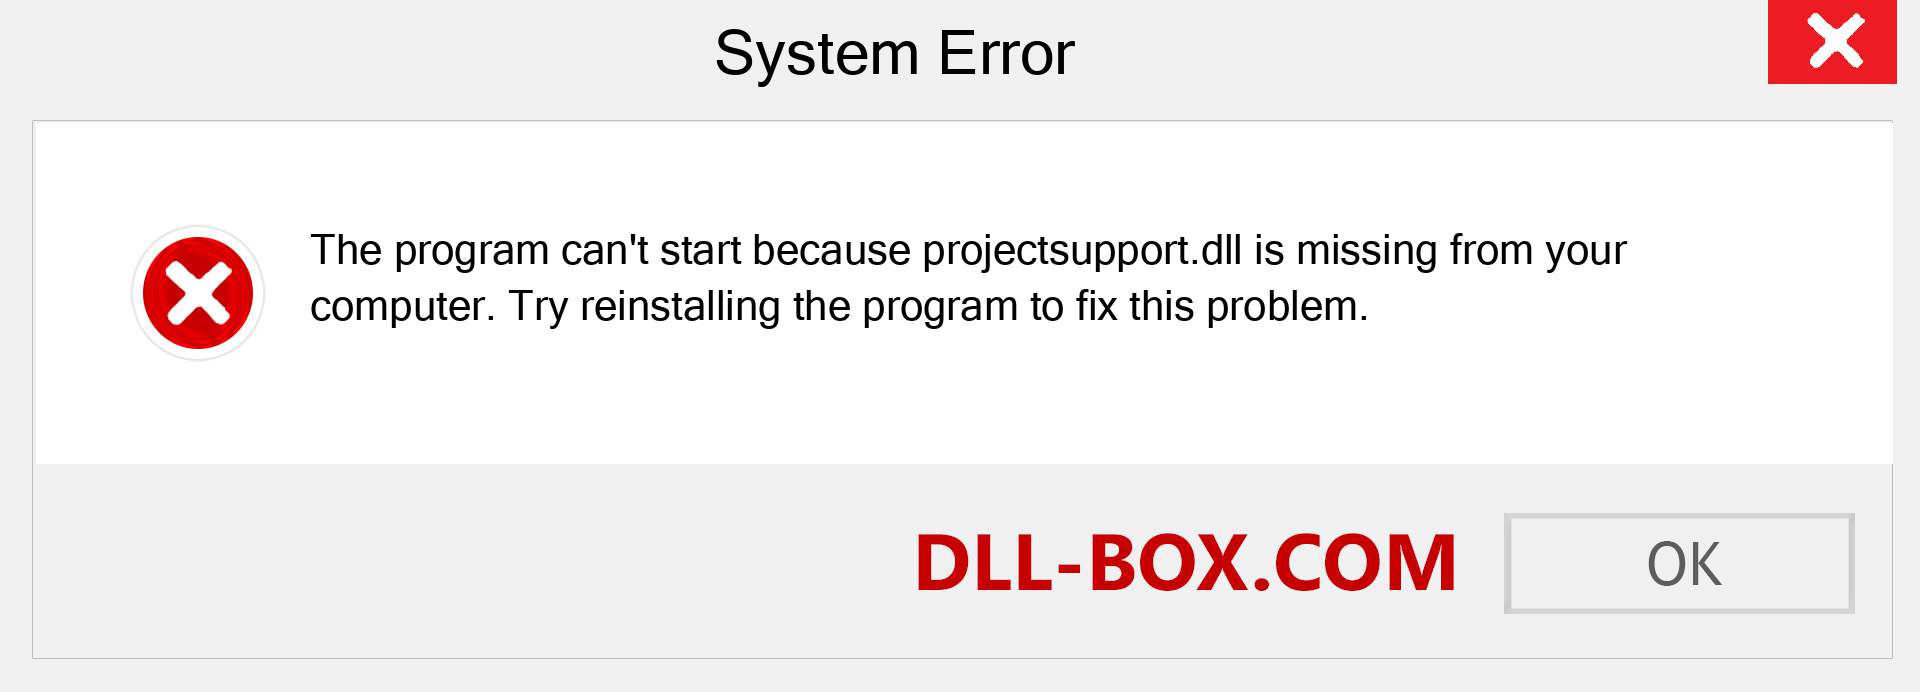  projectsupport.dll file is missing?. Download for Windows 7, 8, 10 - Fix  projectsupport dll Missing Error on Windows, photos, images